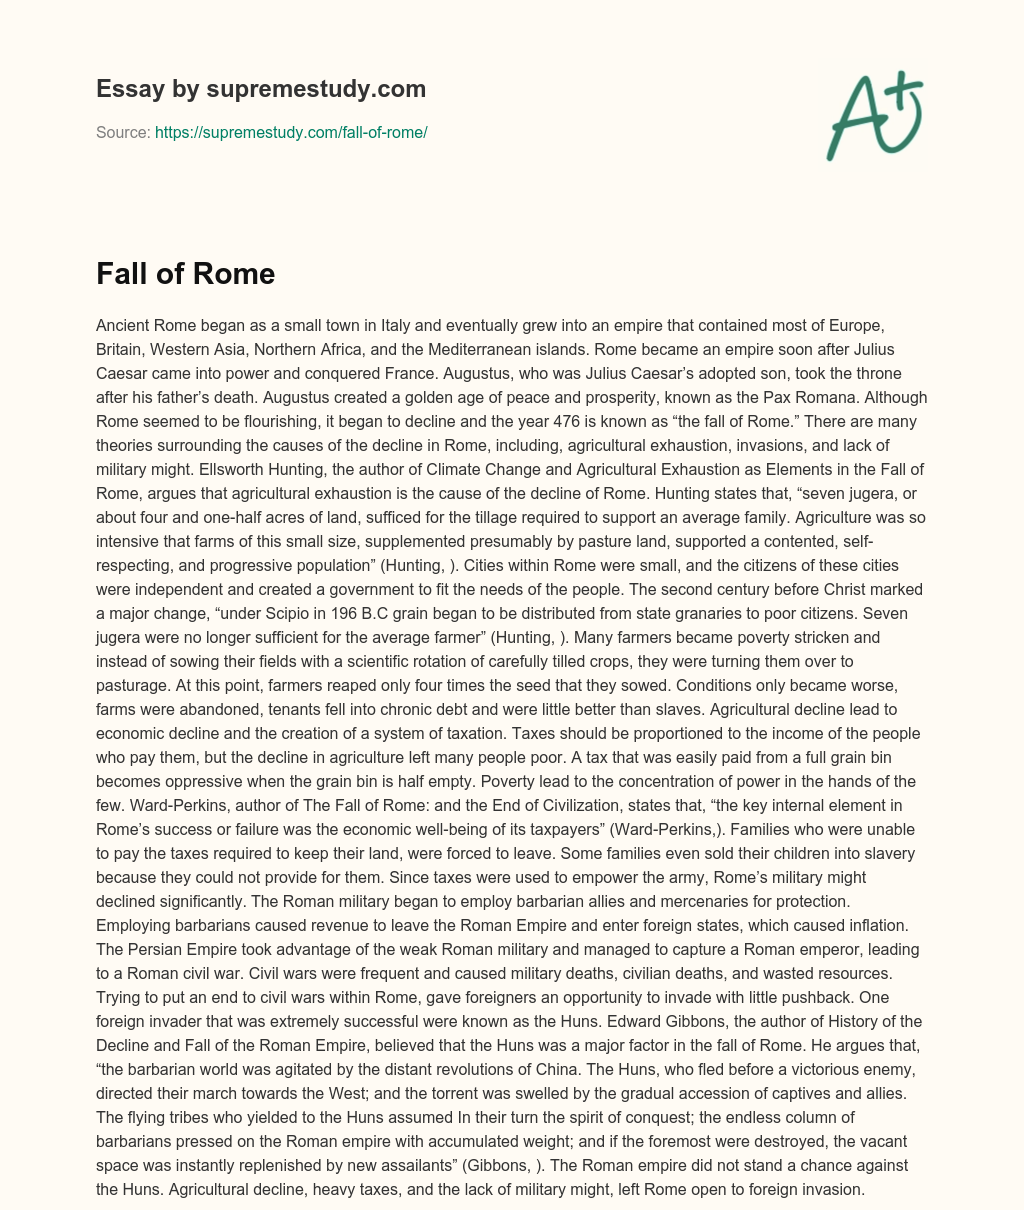 fall of rome causes essay